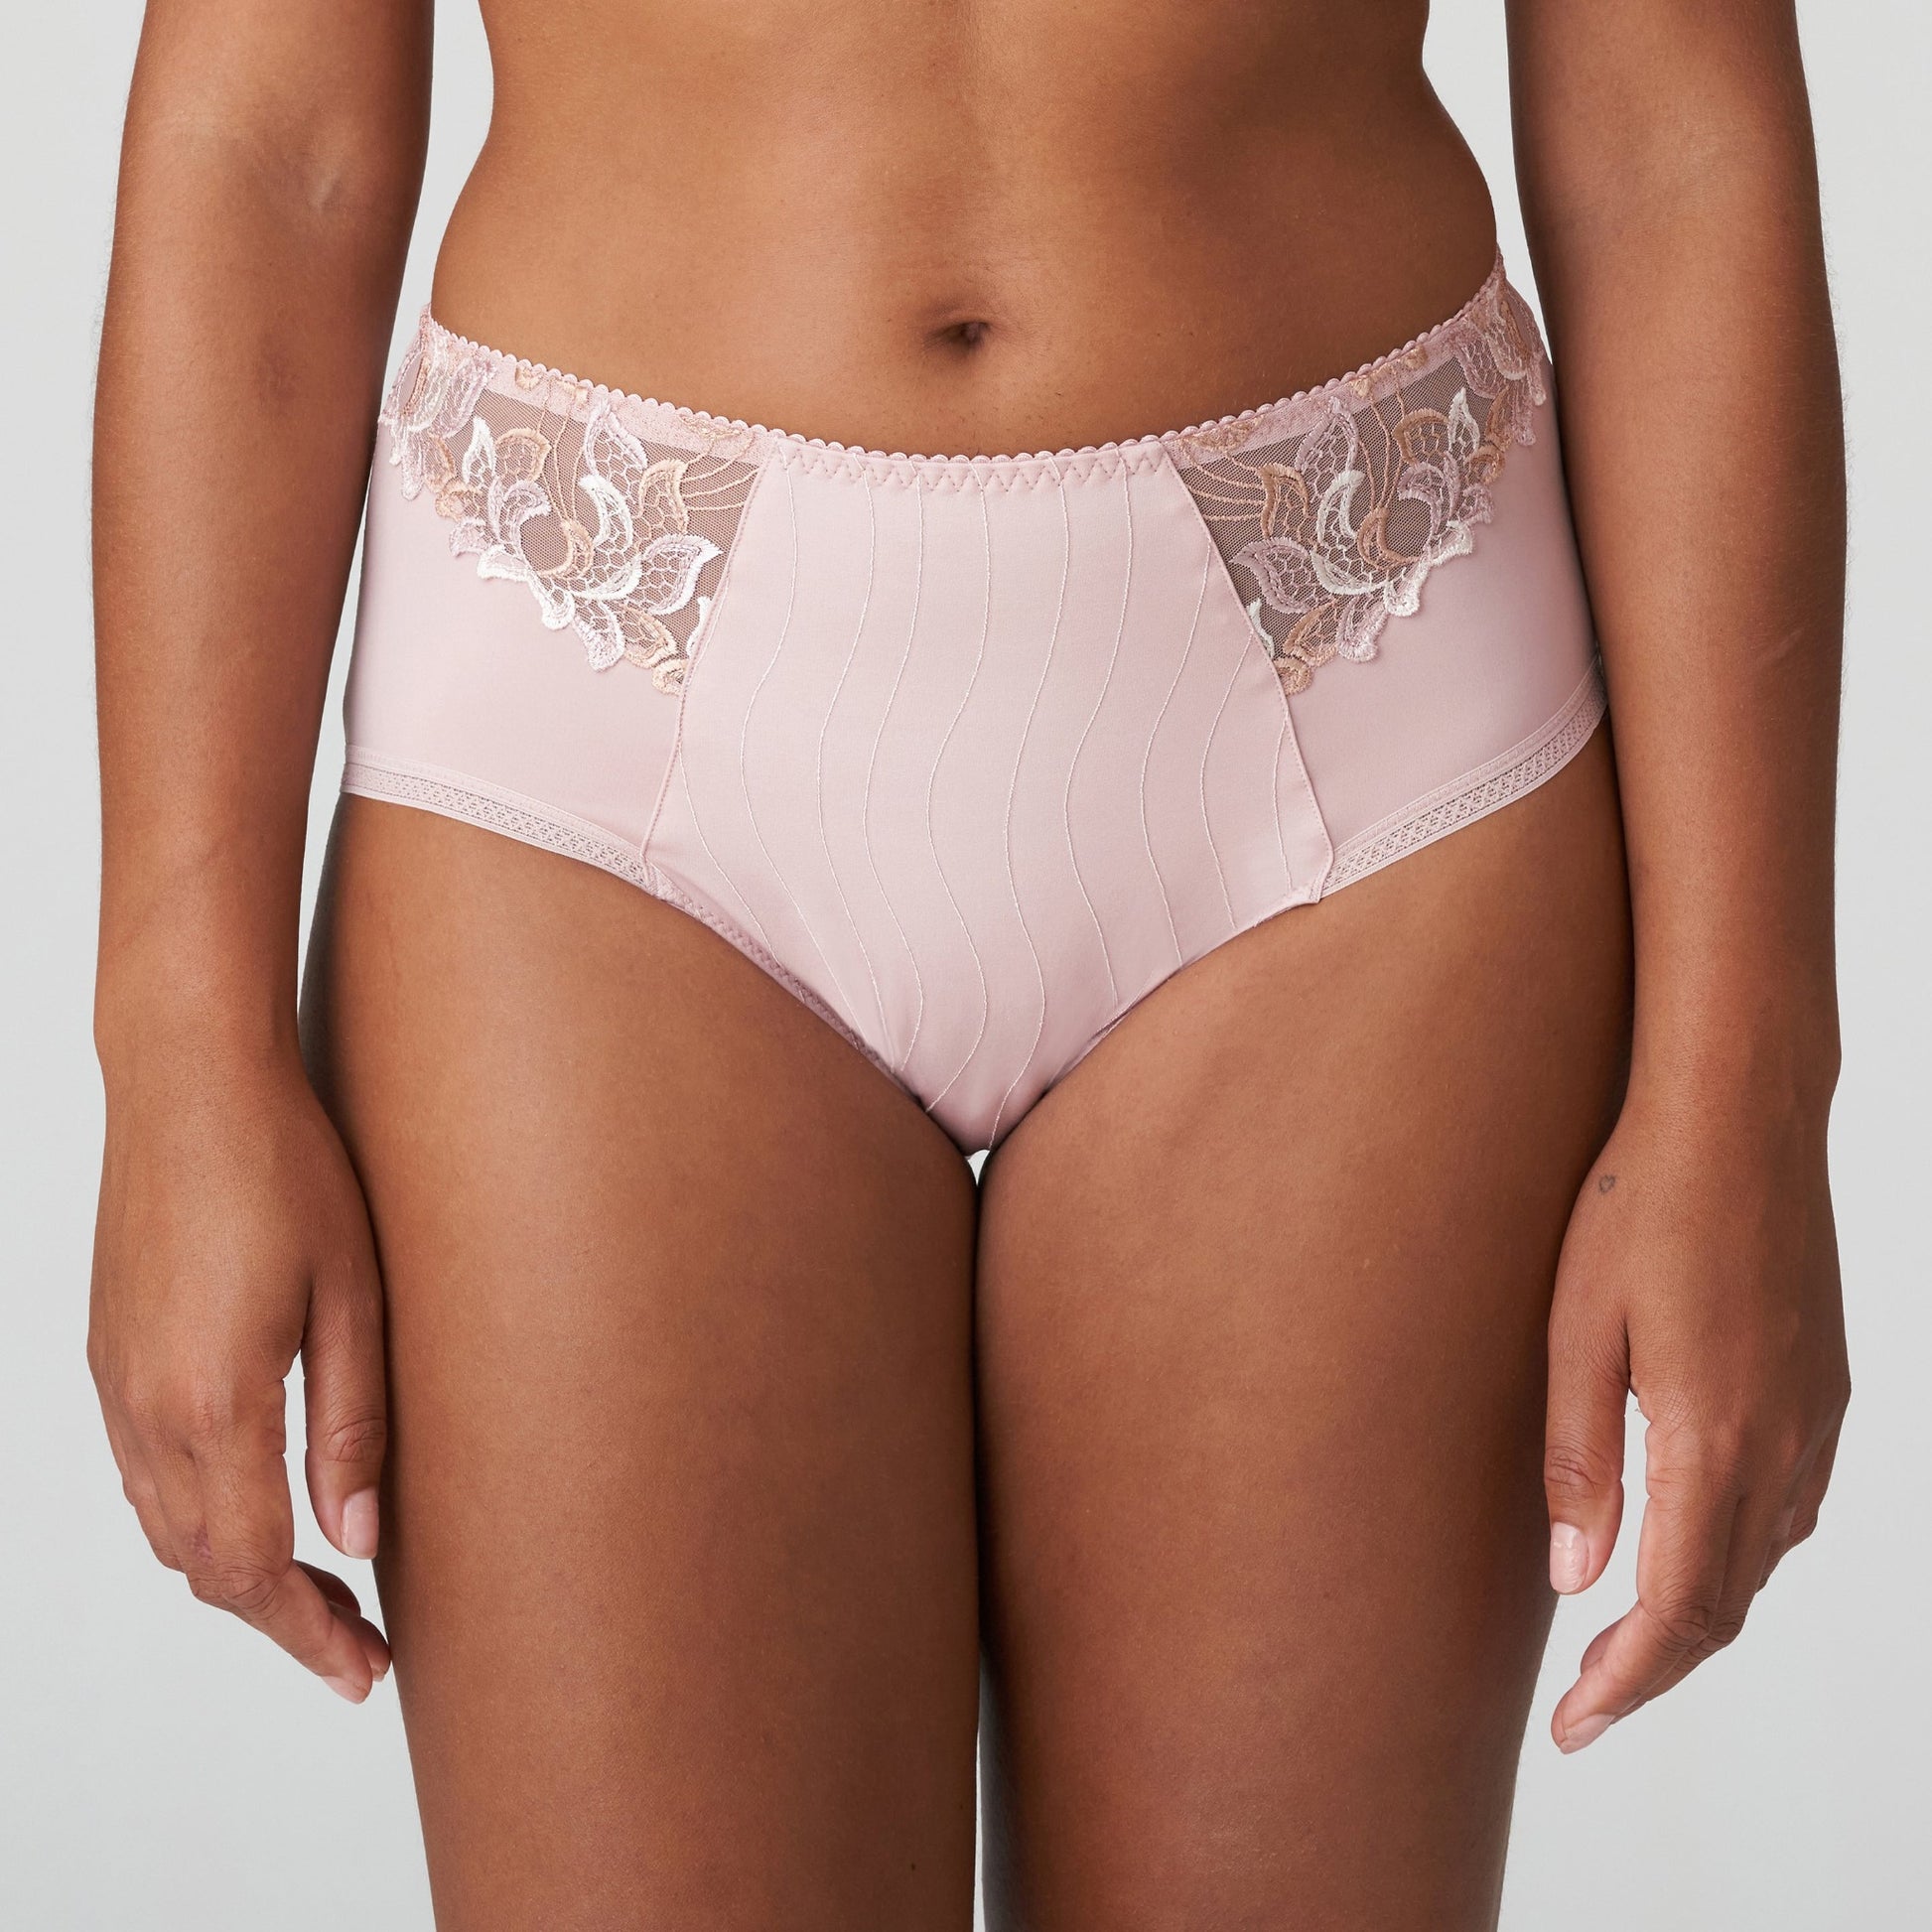 Woman wearing the Deauville high-waisted full brief with luxurious lace in Vintage Pink by Primadonna.